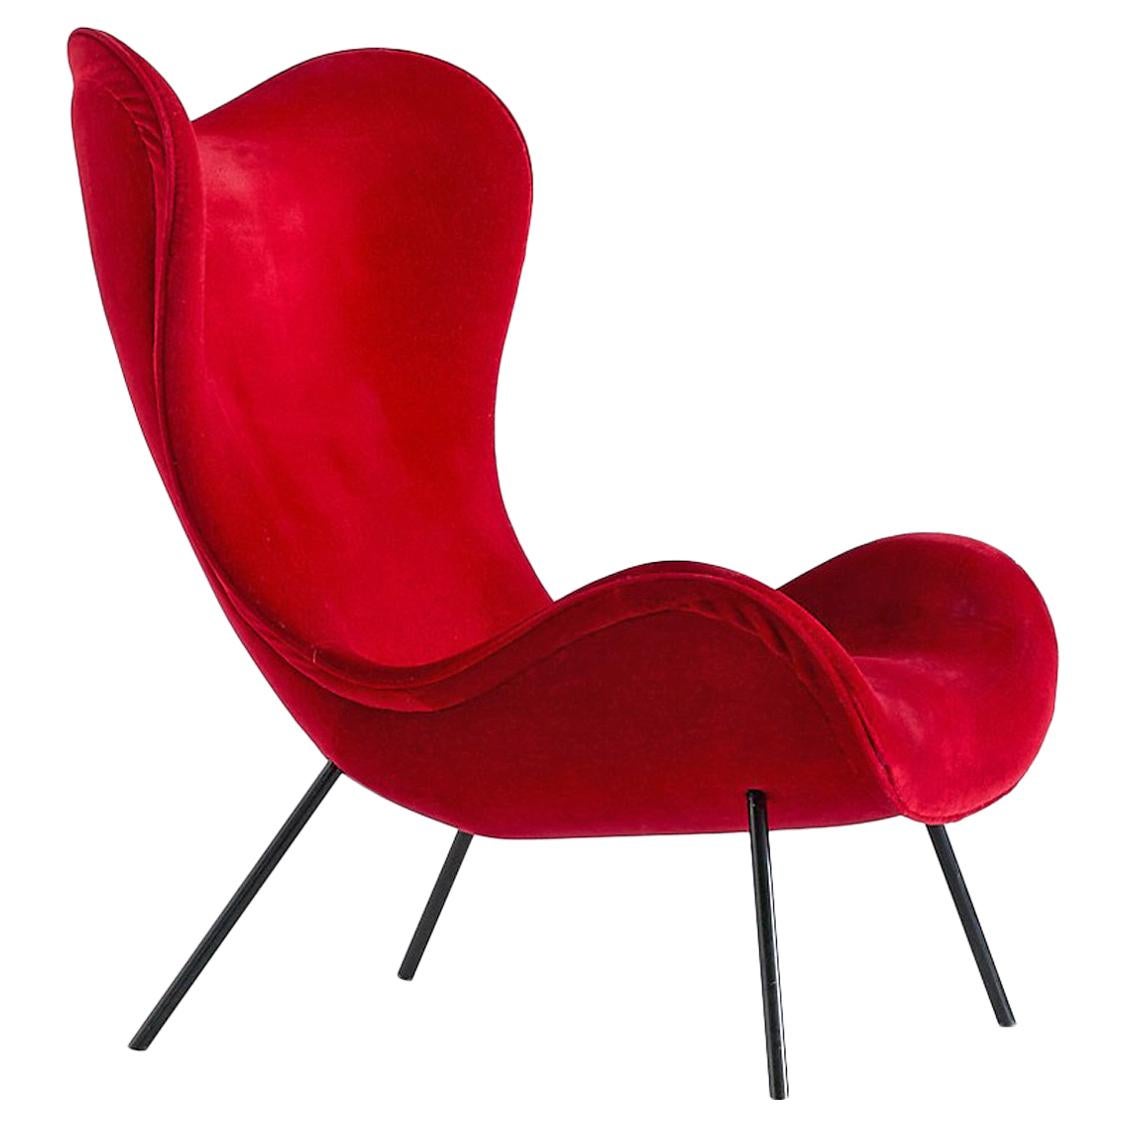 Fritz Neth 'Madame' Lounge Chair in Red Velvet for Correcta, Germany, 1950s